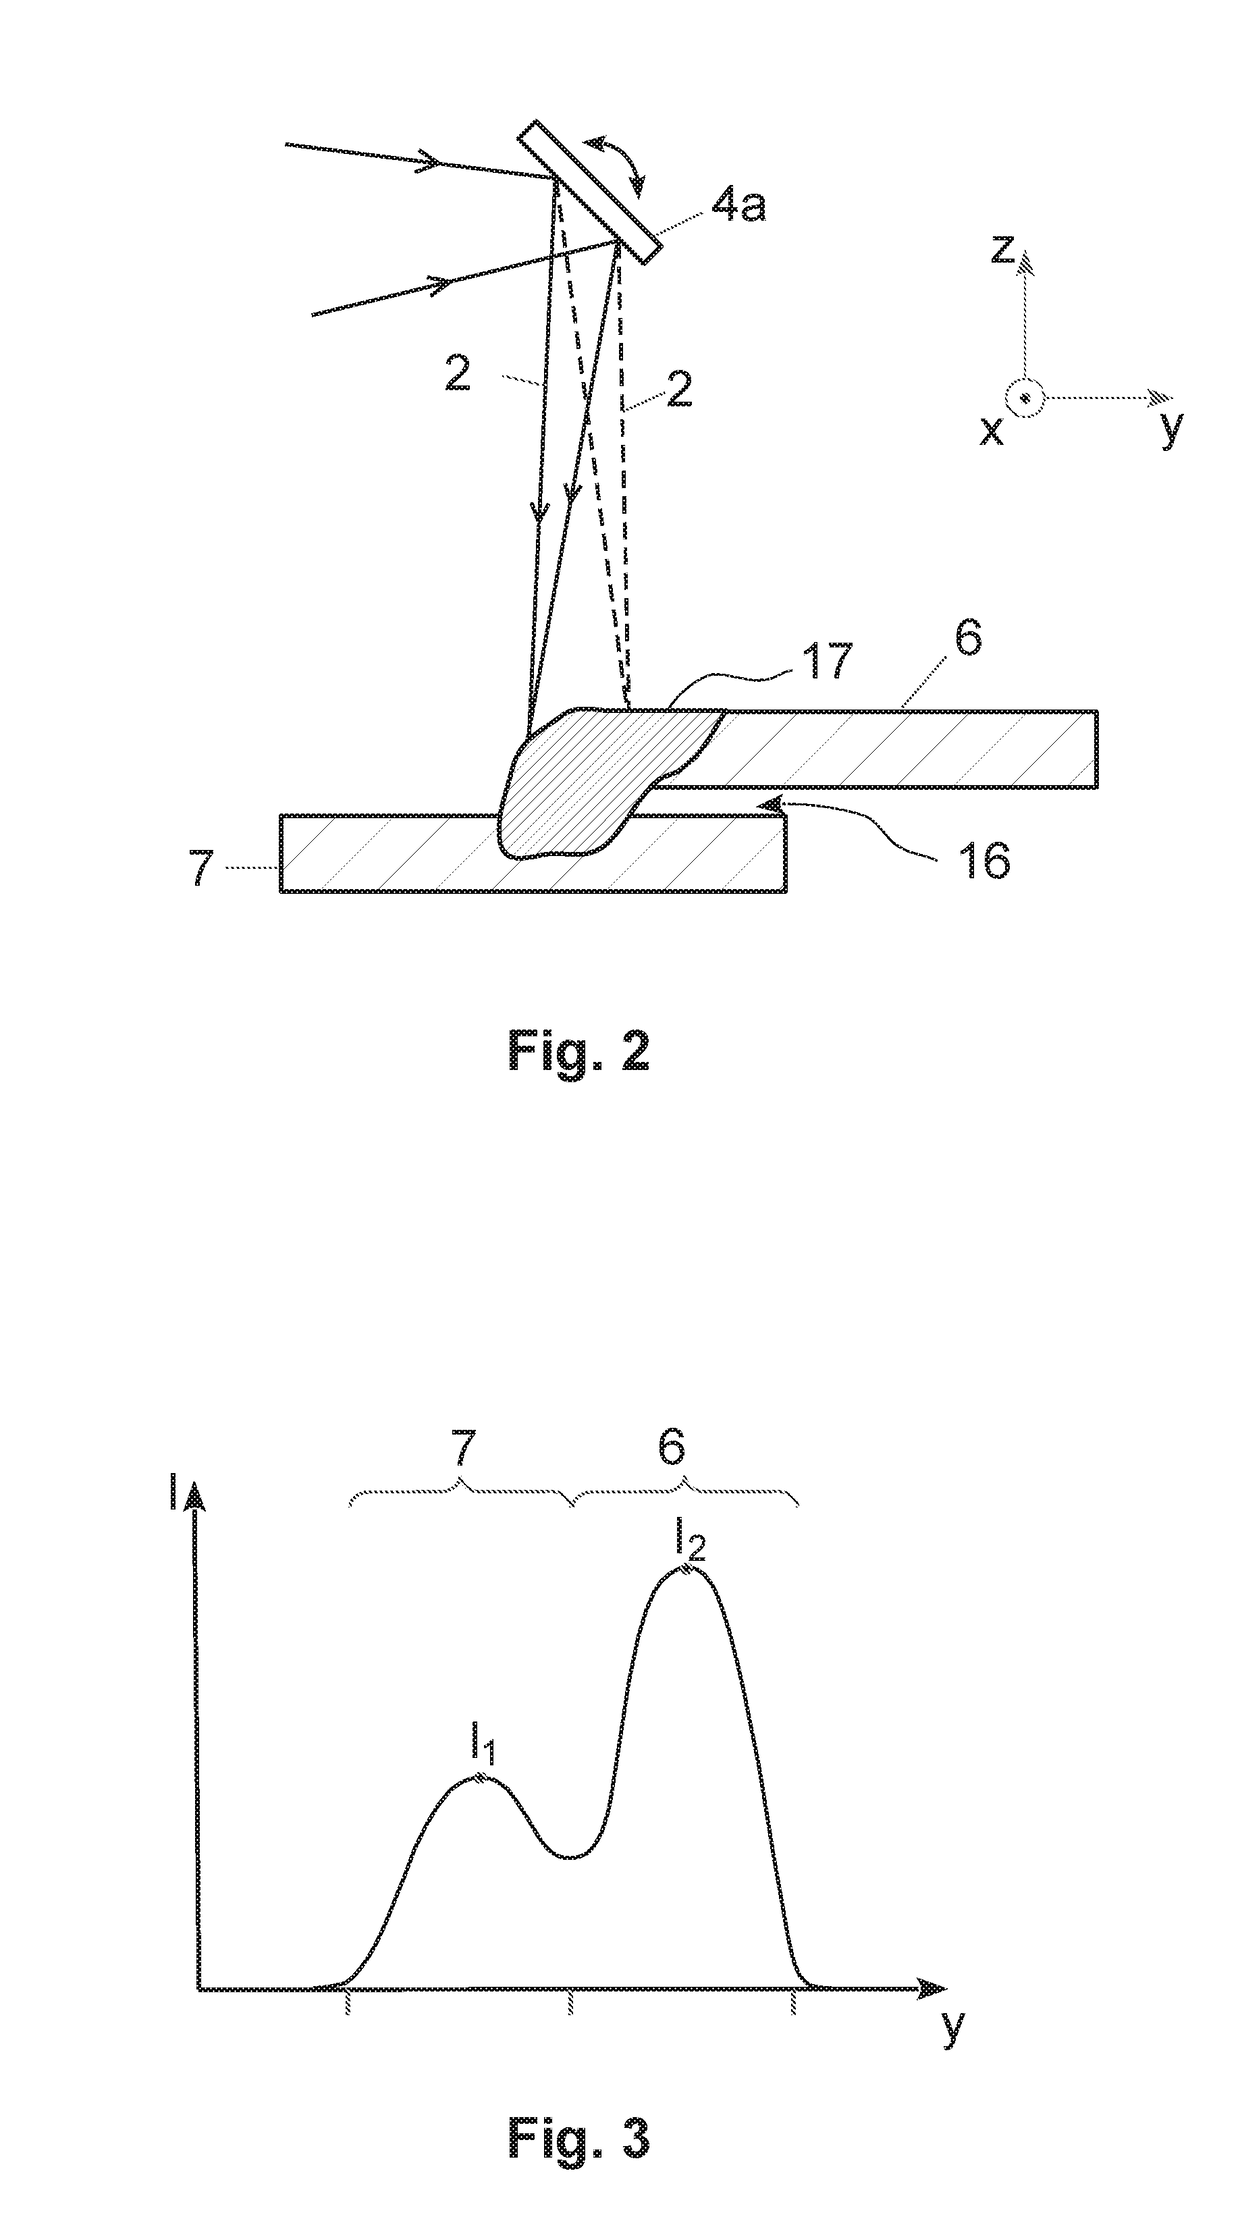 Method and Apparatus for Joining Workpieces at a Lap Joint